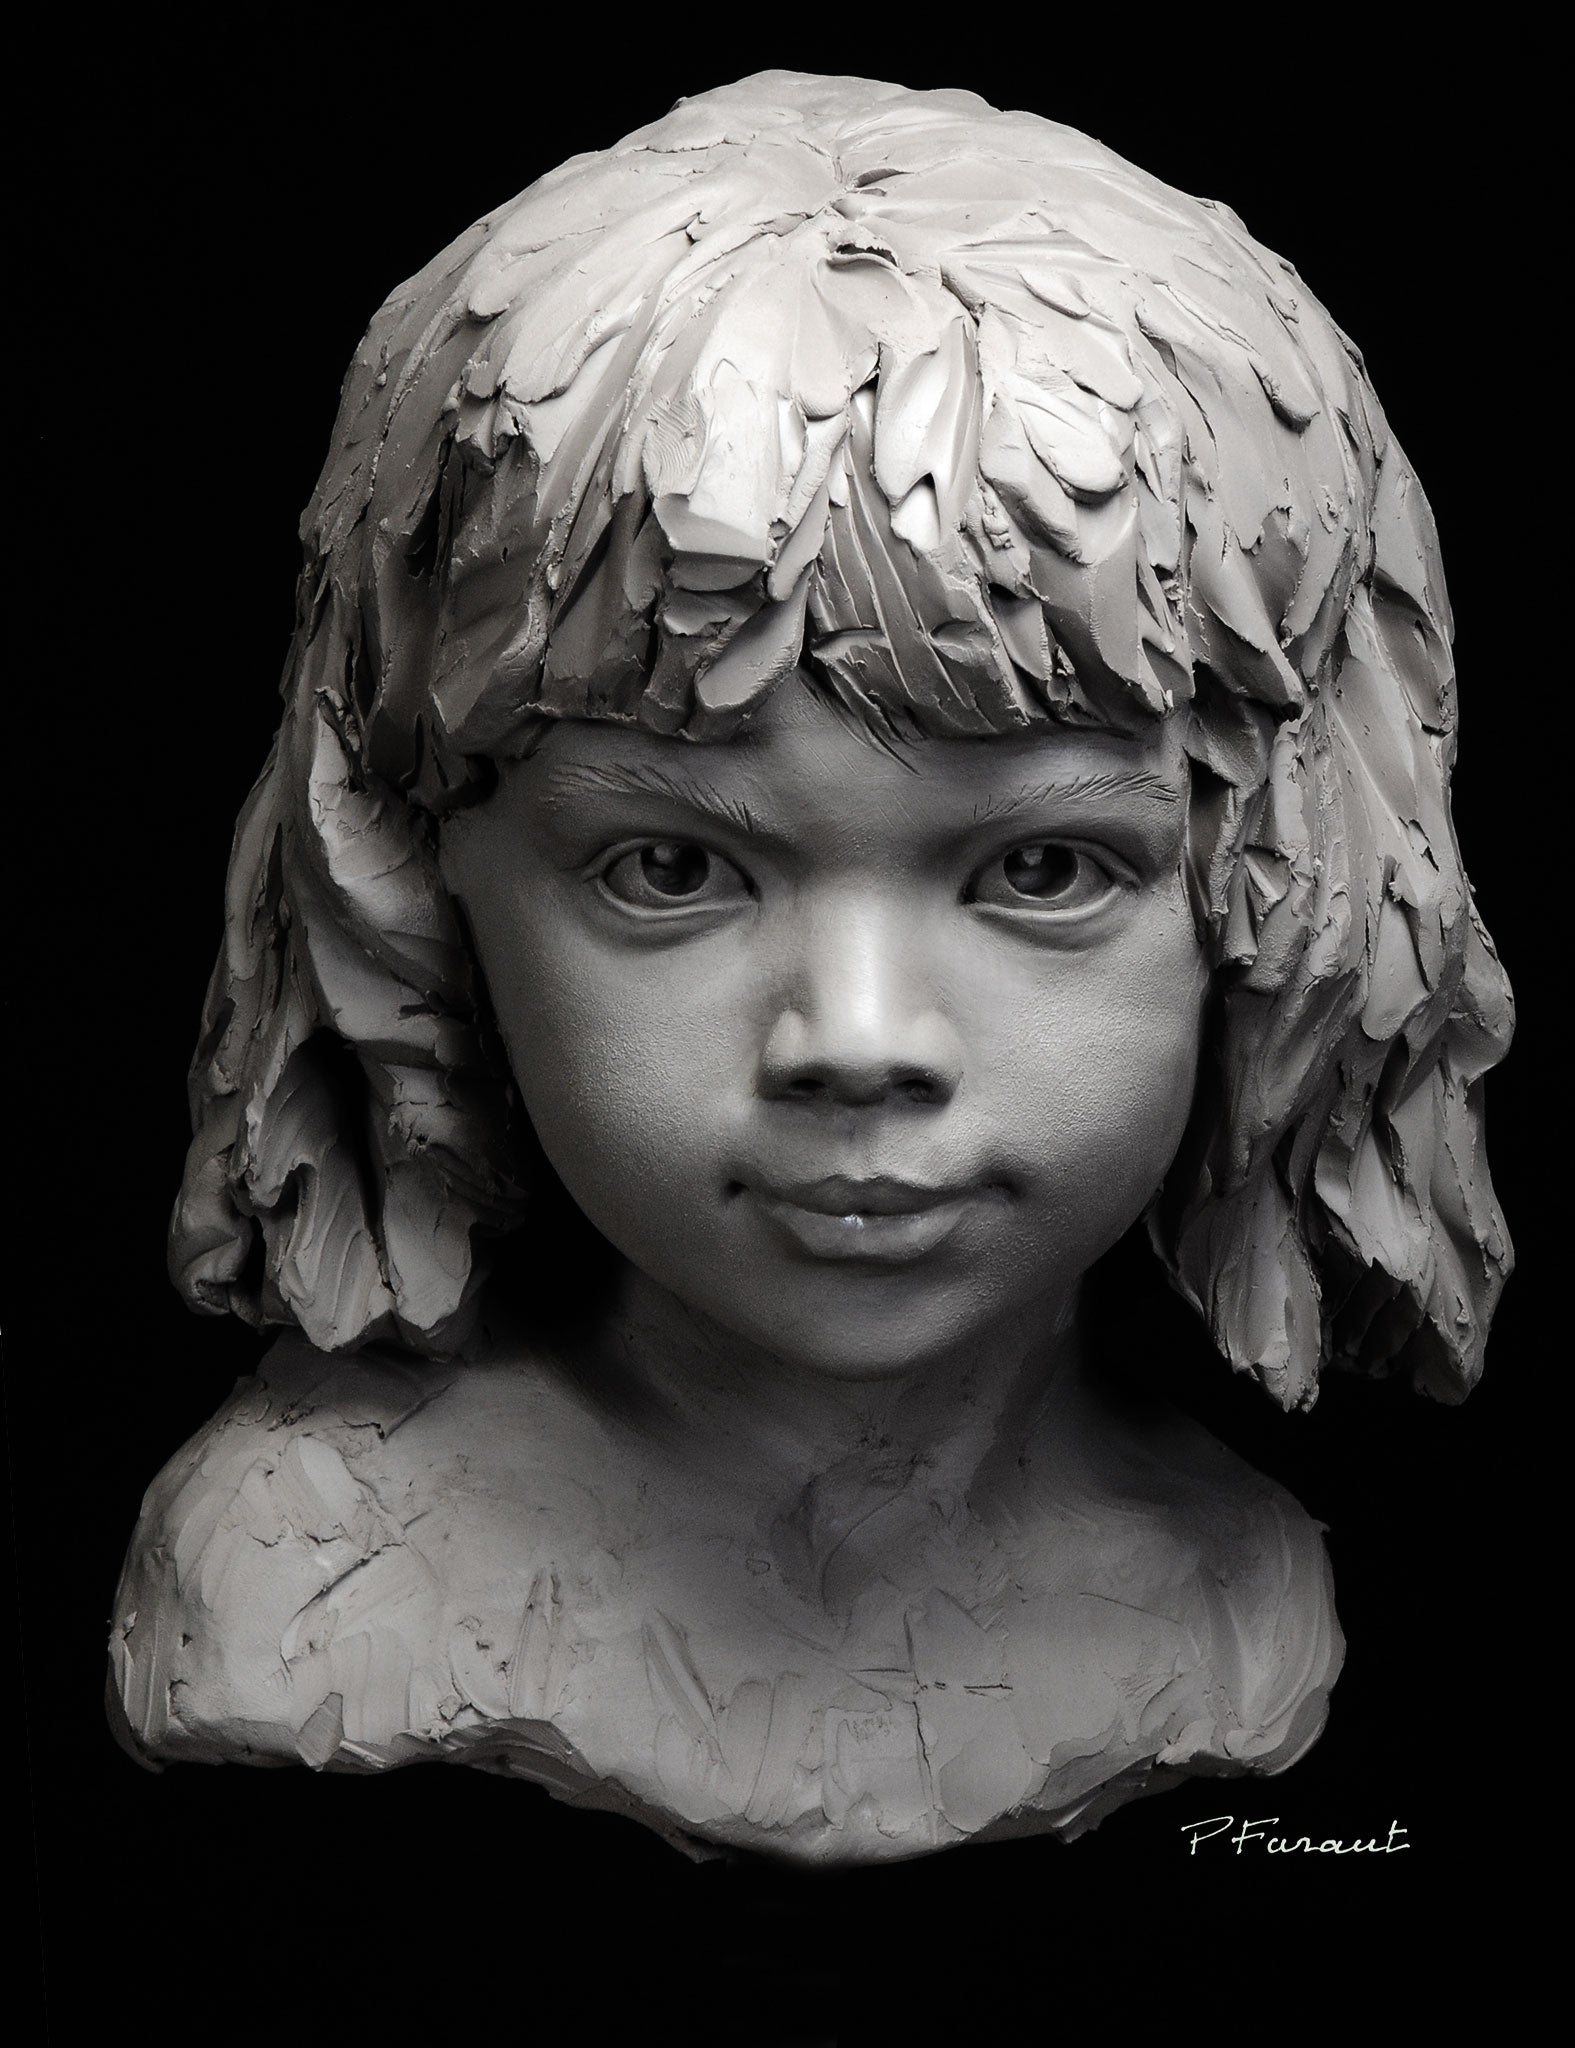 Stylized clay portrait sculpture of a little girl by artist Philippe Faraut